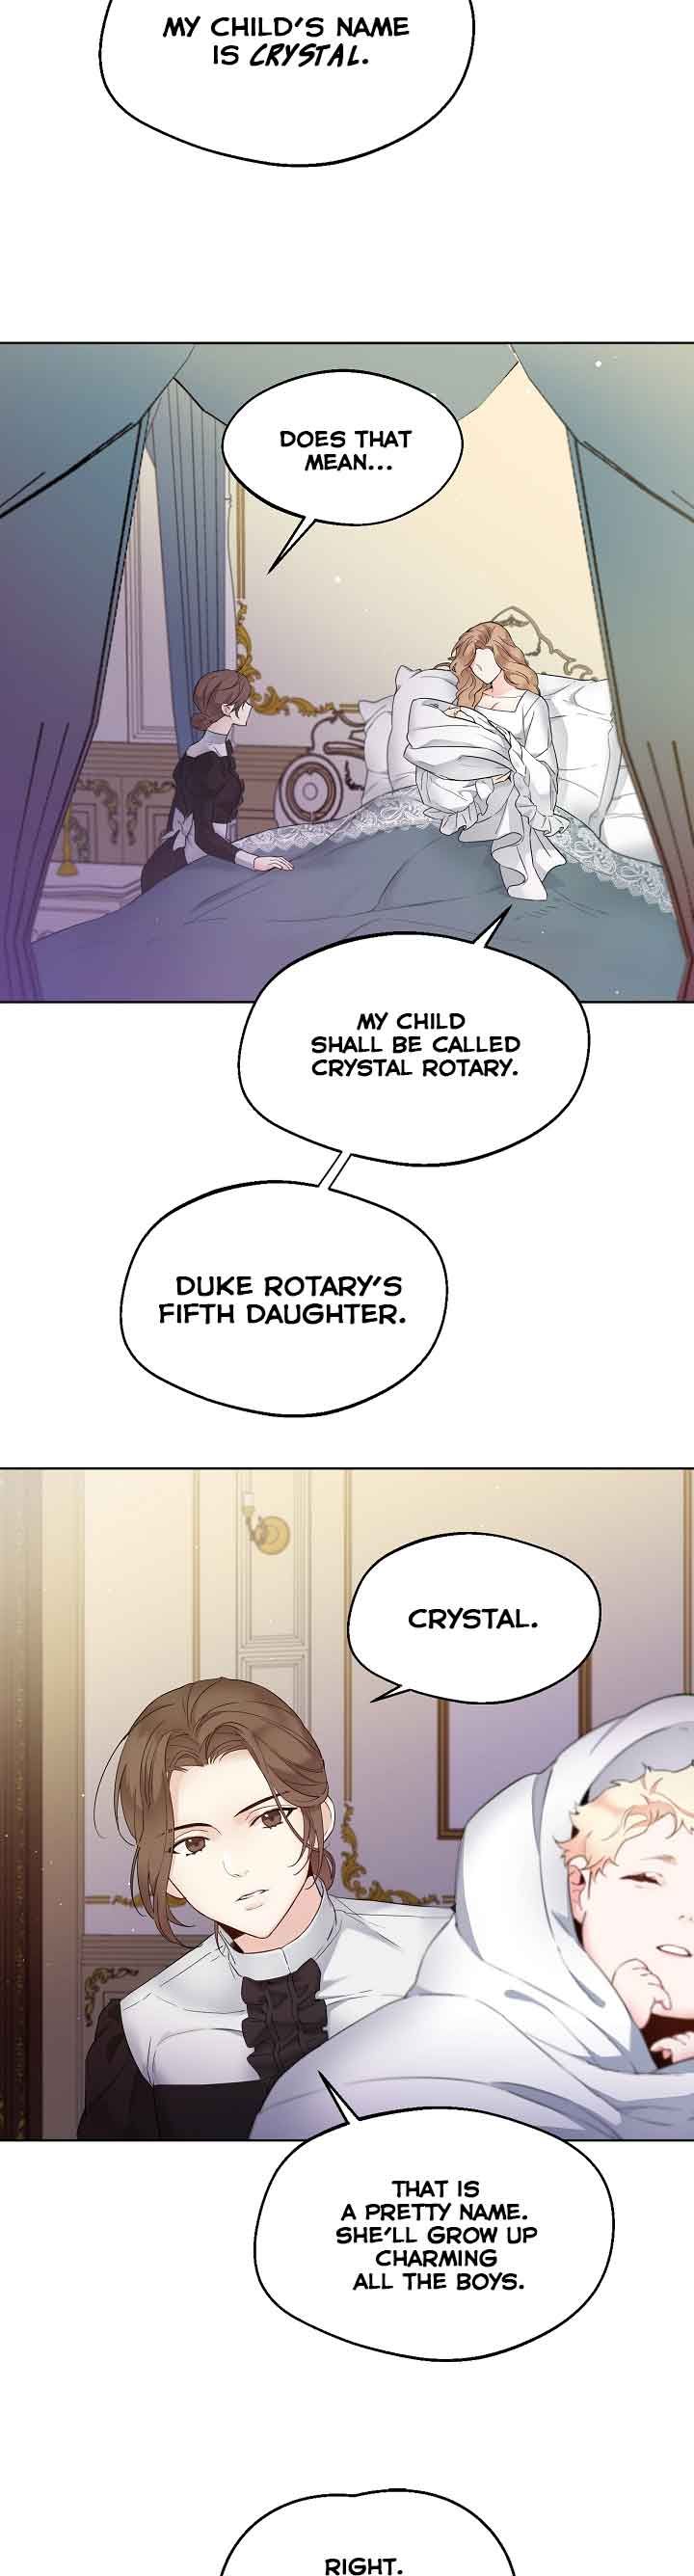 Lady Crystal Is A Man - Page 2